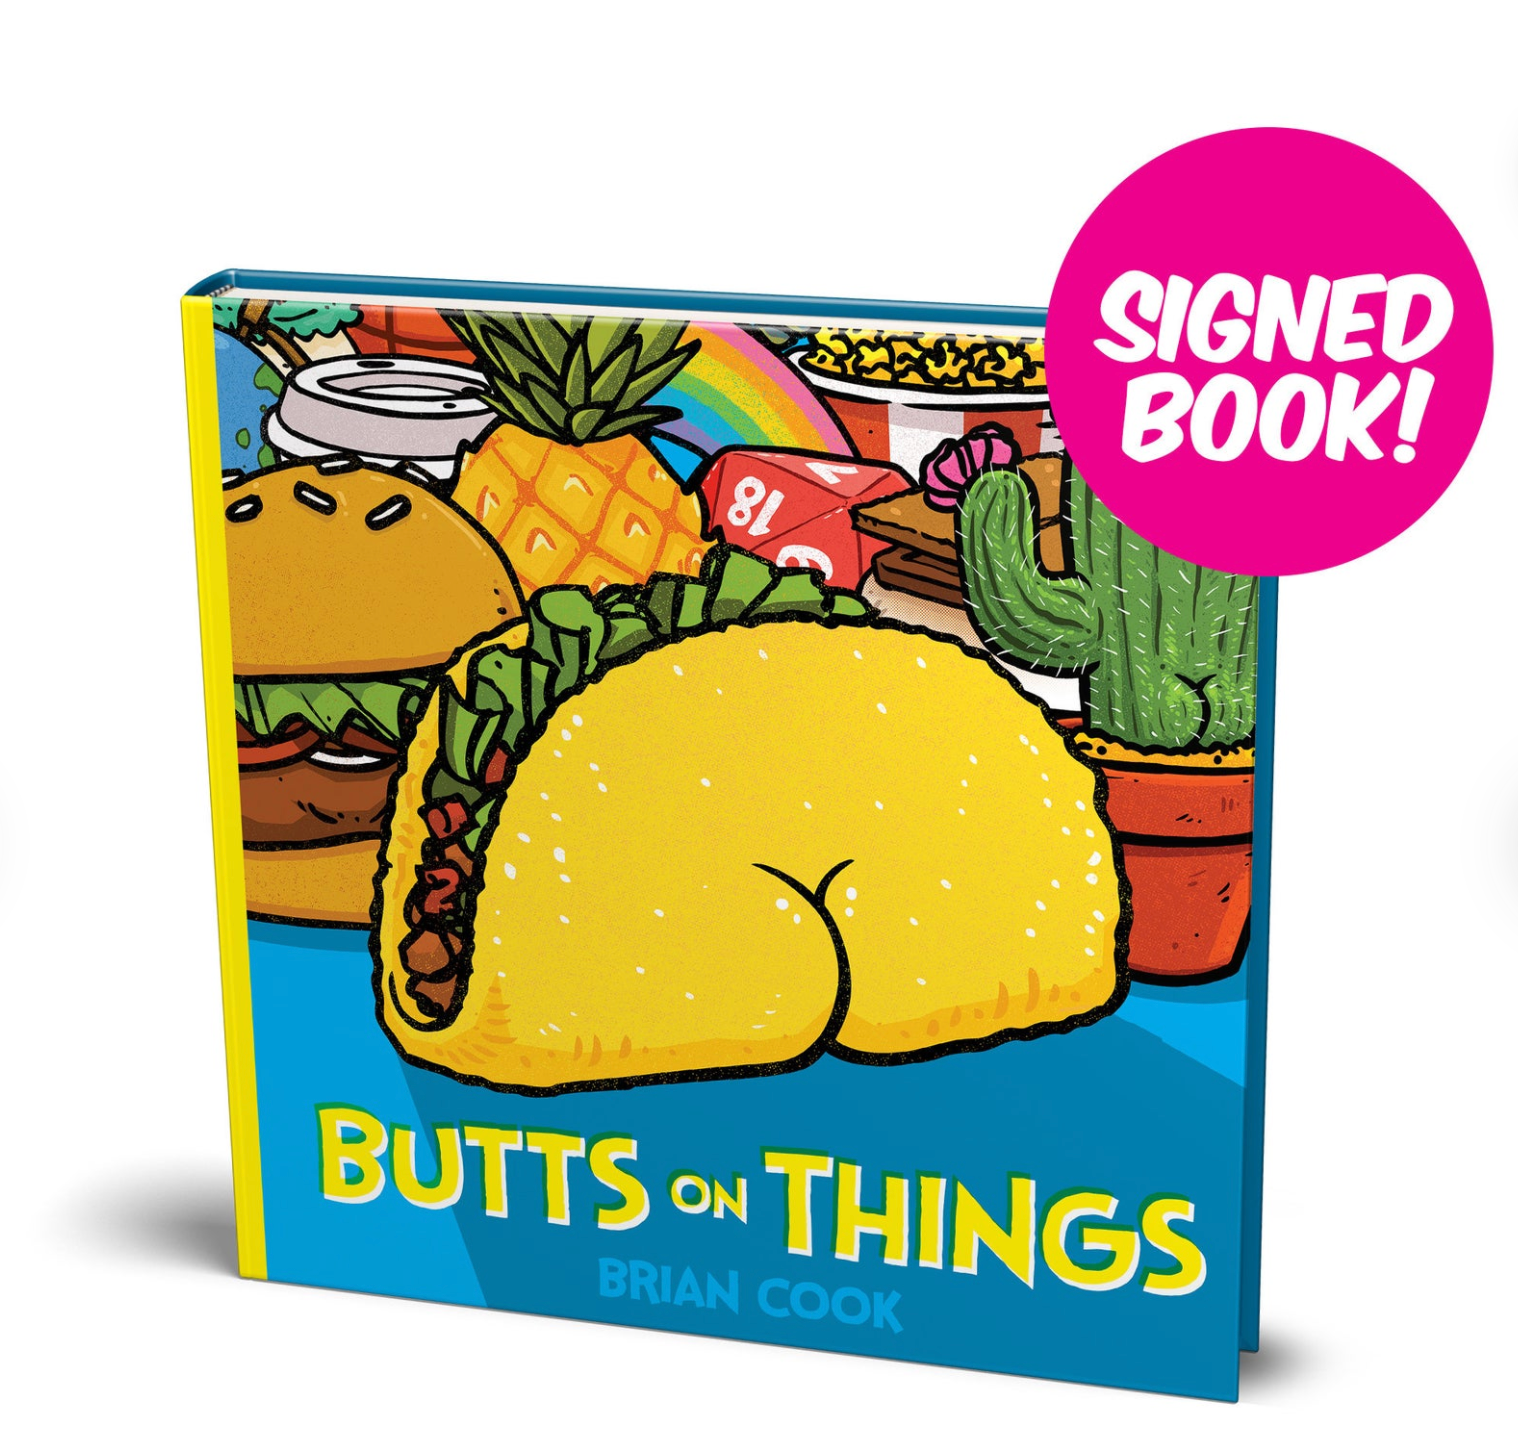 Book - Signed Art Book - Butts on Things